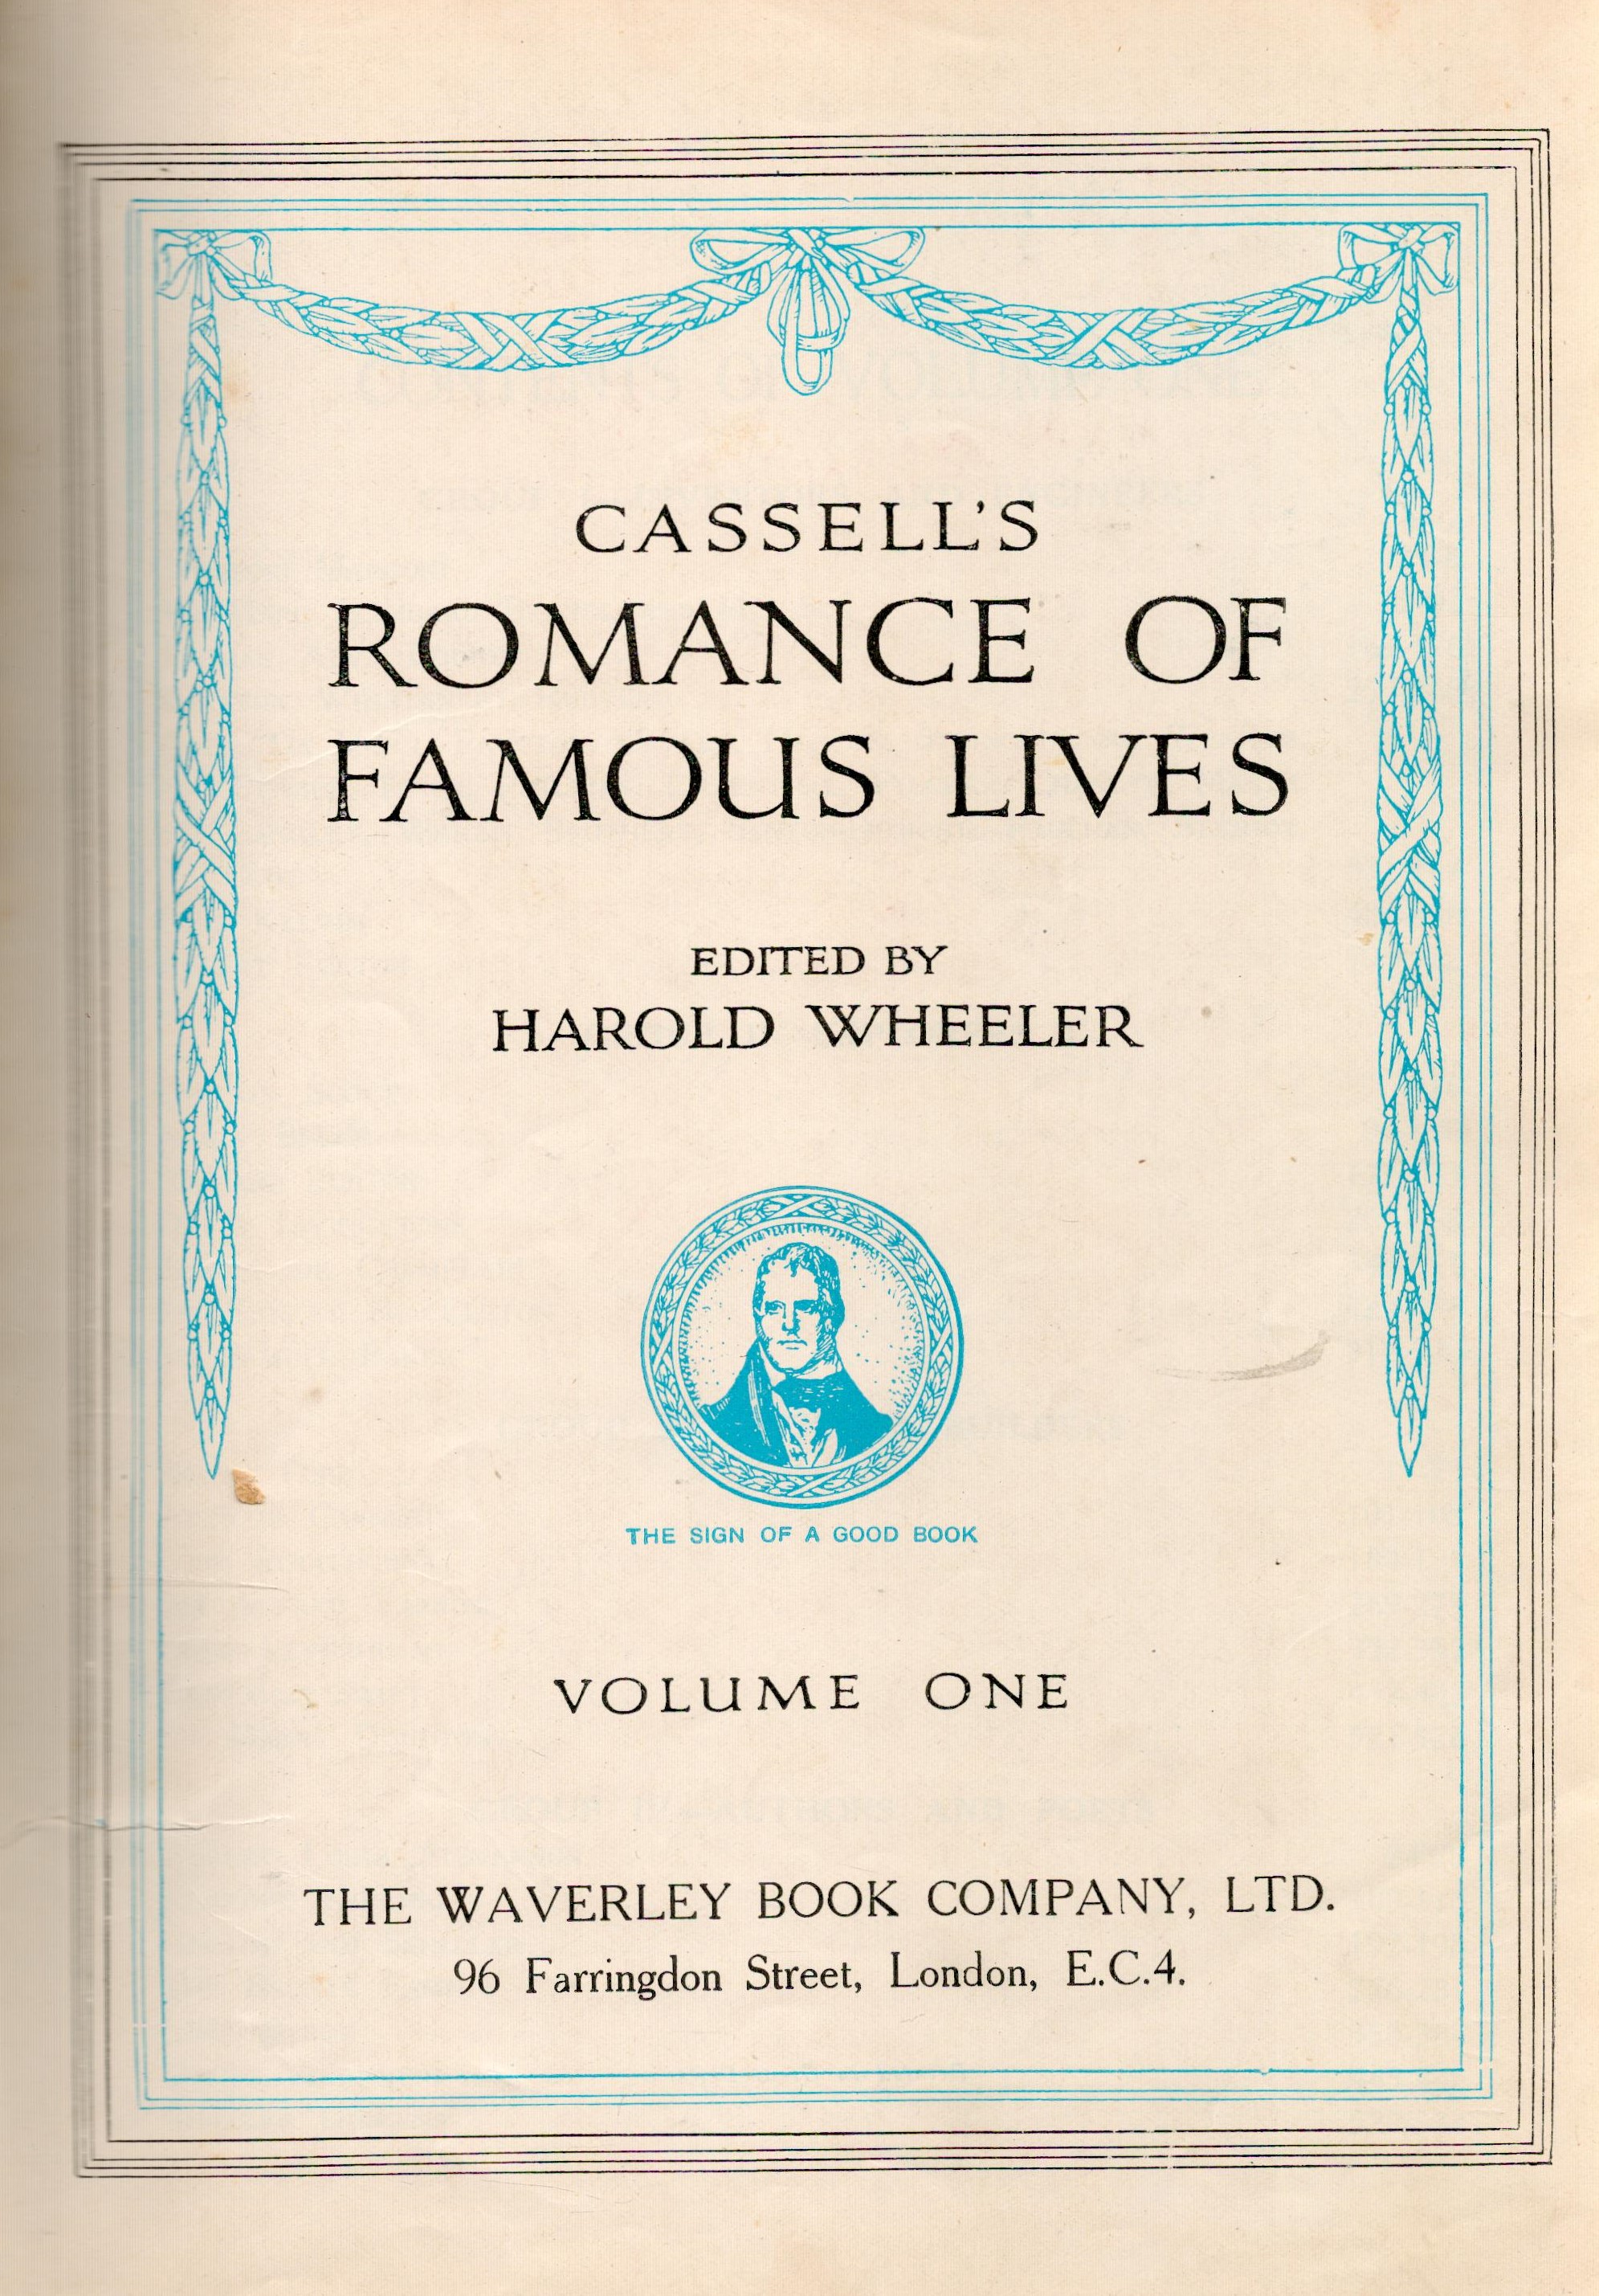 Cassell's Romance of Famous Lives edited by Harold Wheeler Hardback Book date and edition unknown - Image 2 of 2